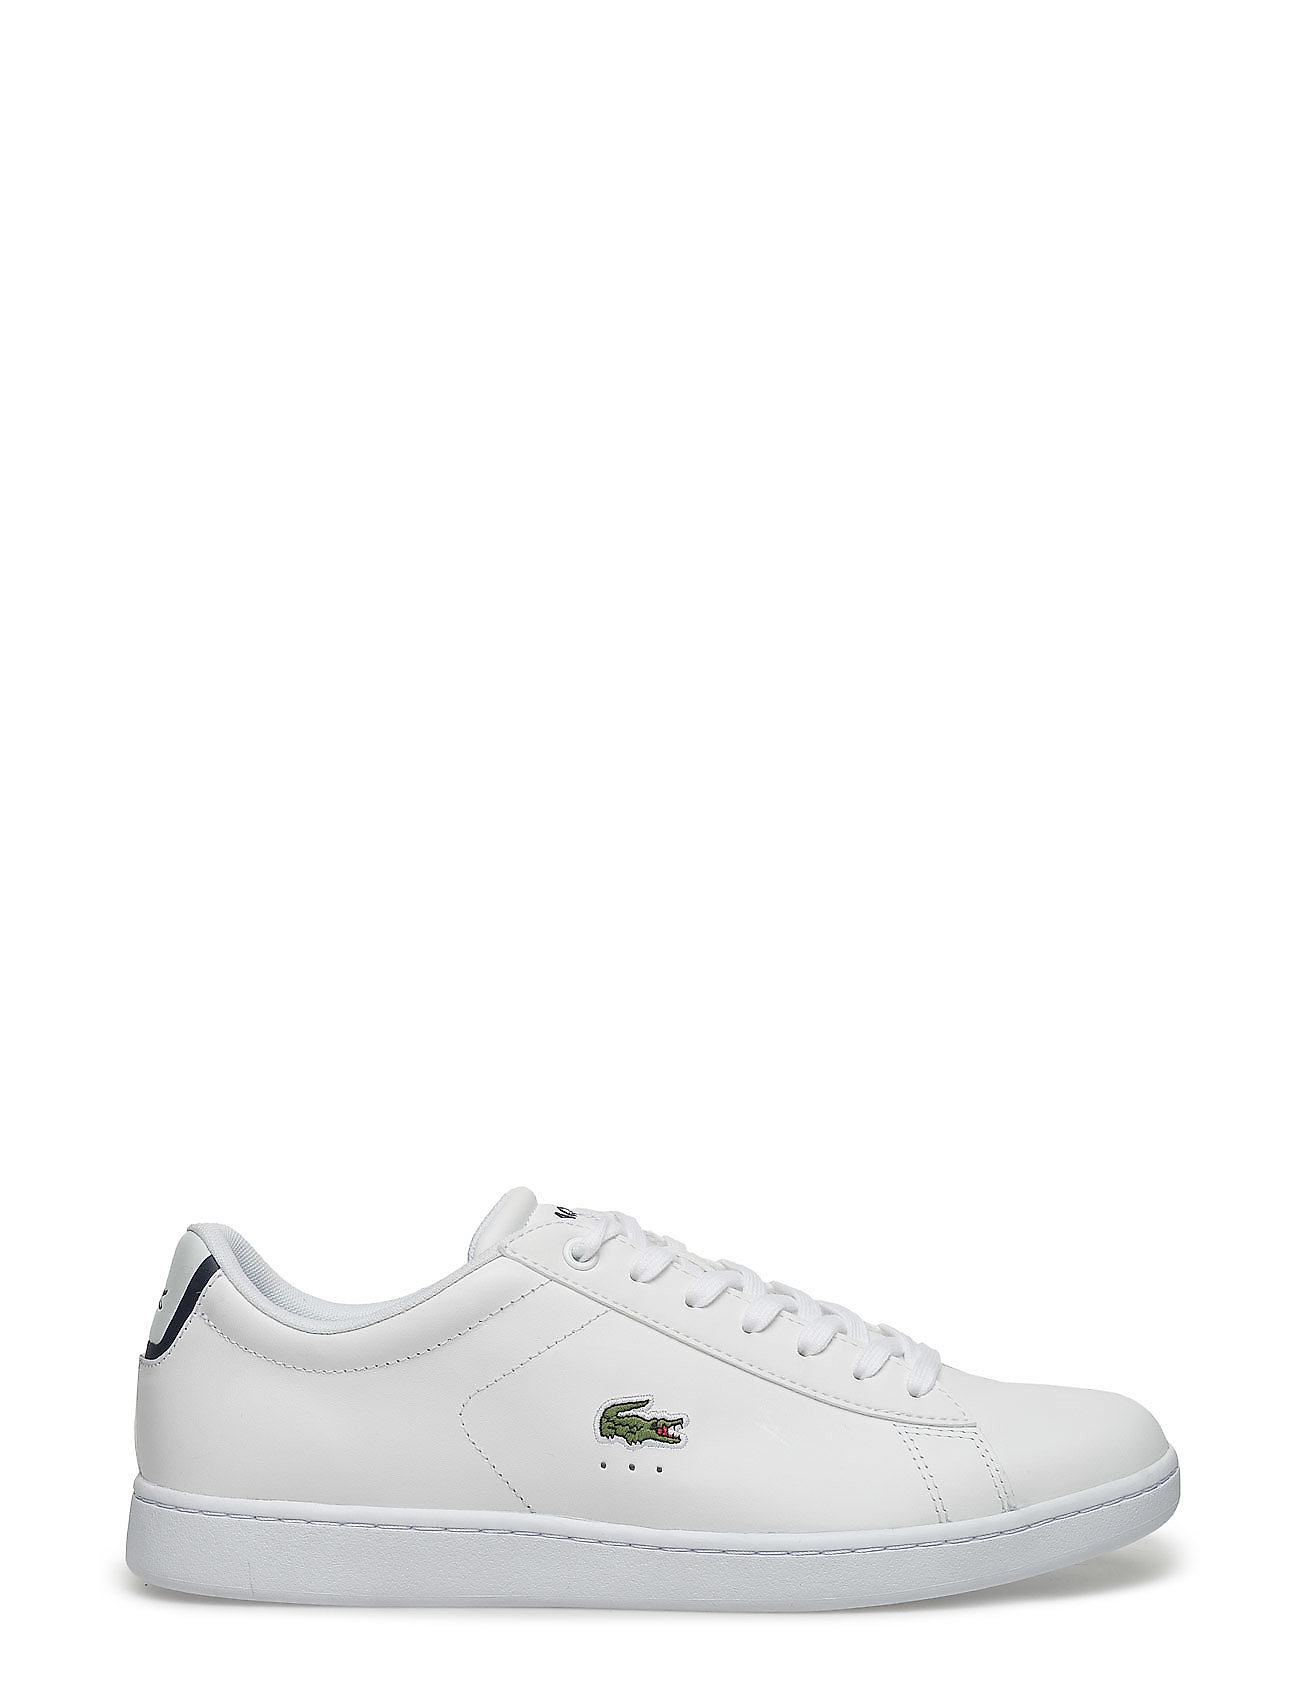 Lacoste sneakers – Carnaby Evo Bl 1 Sma Low-top Sneakers Hvid Lacoste Shoes herre i Hvid - Pashion.dk